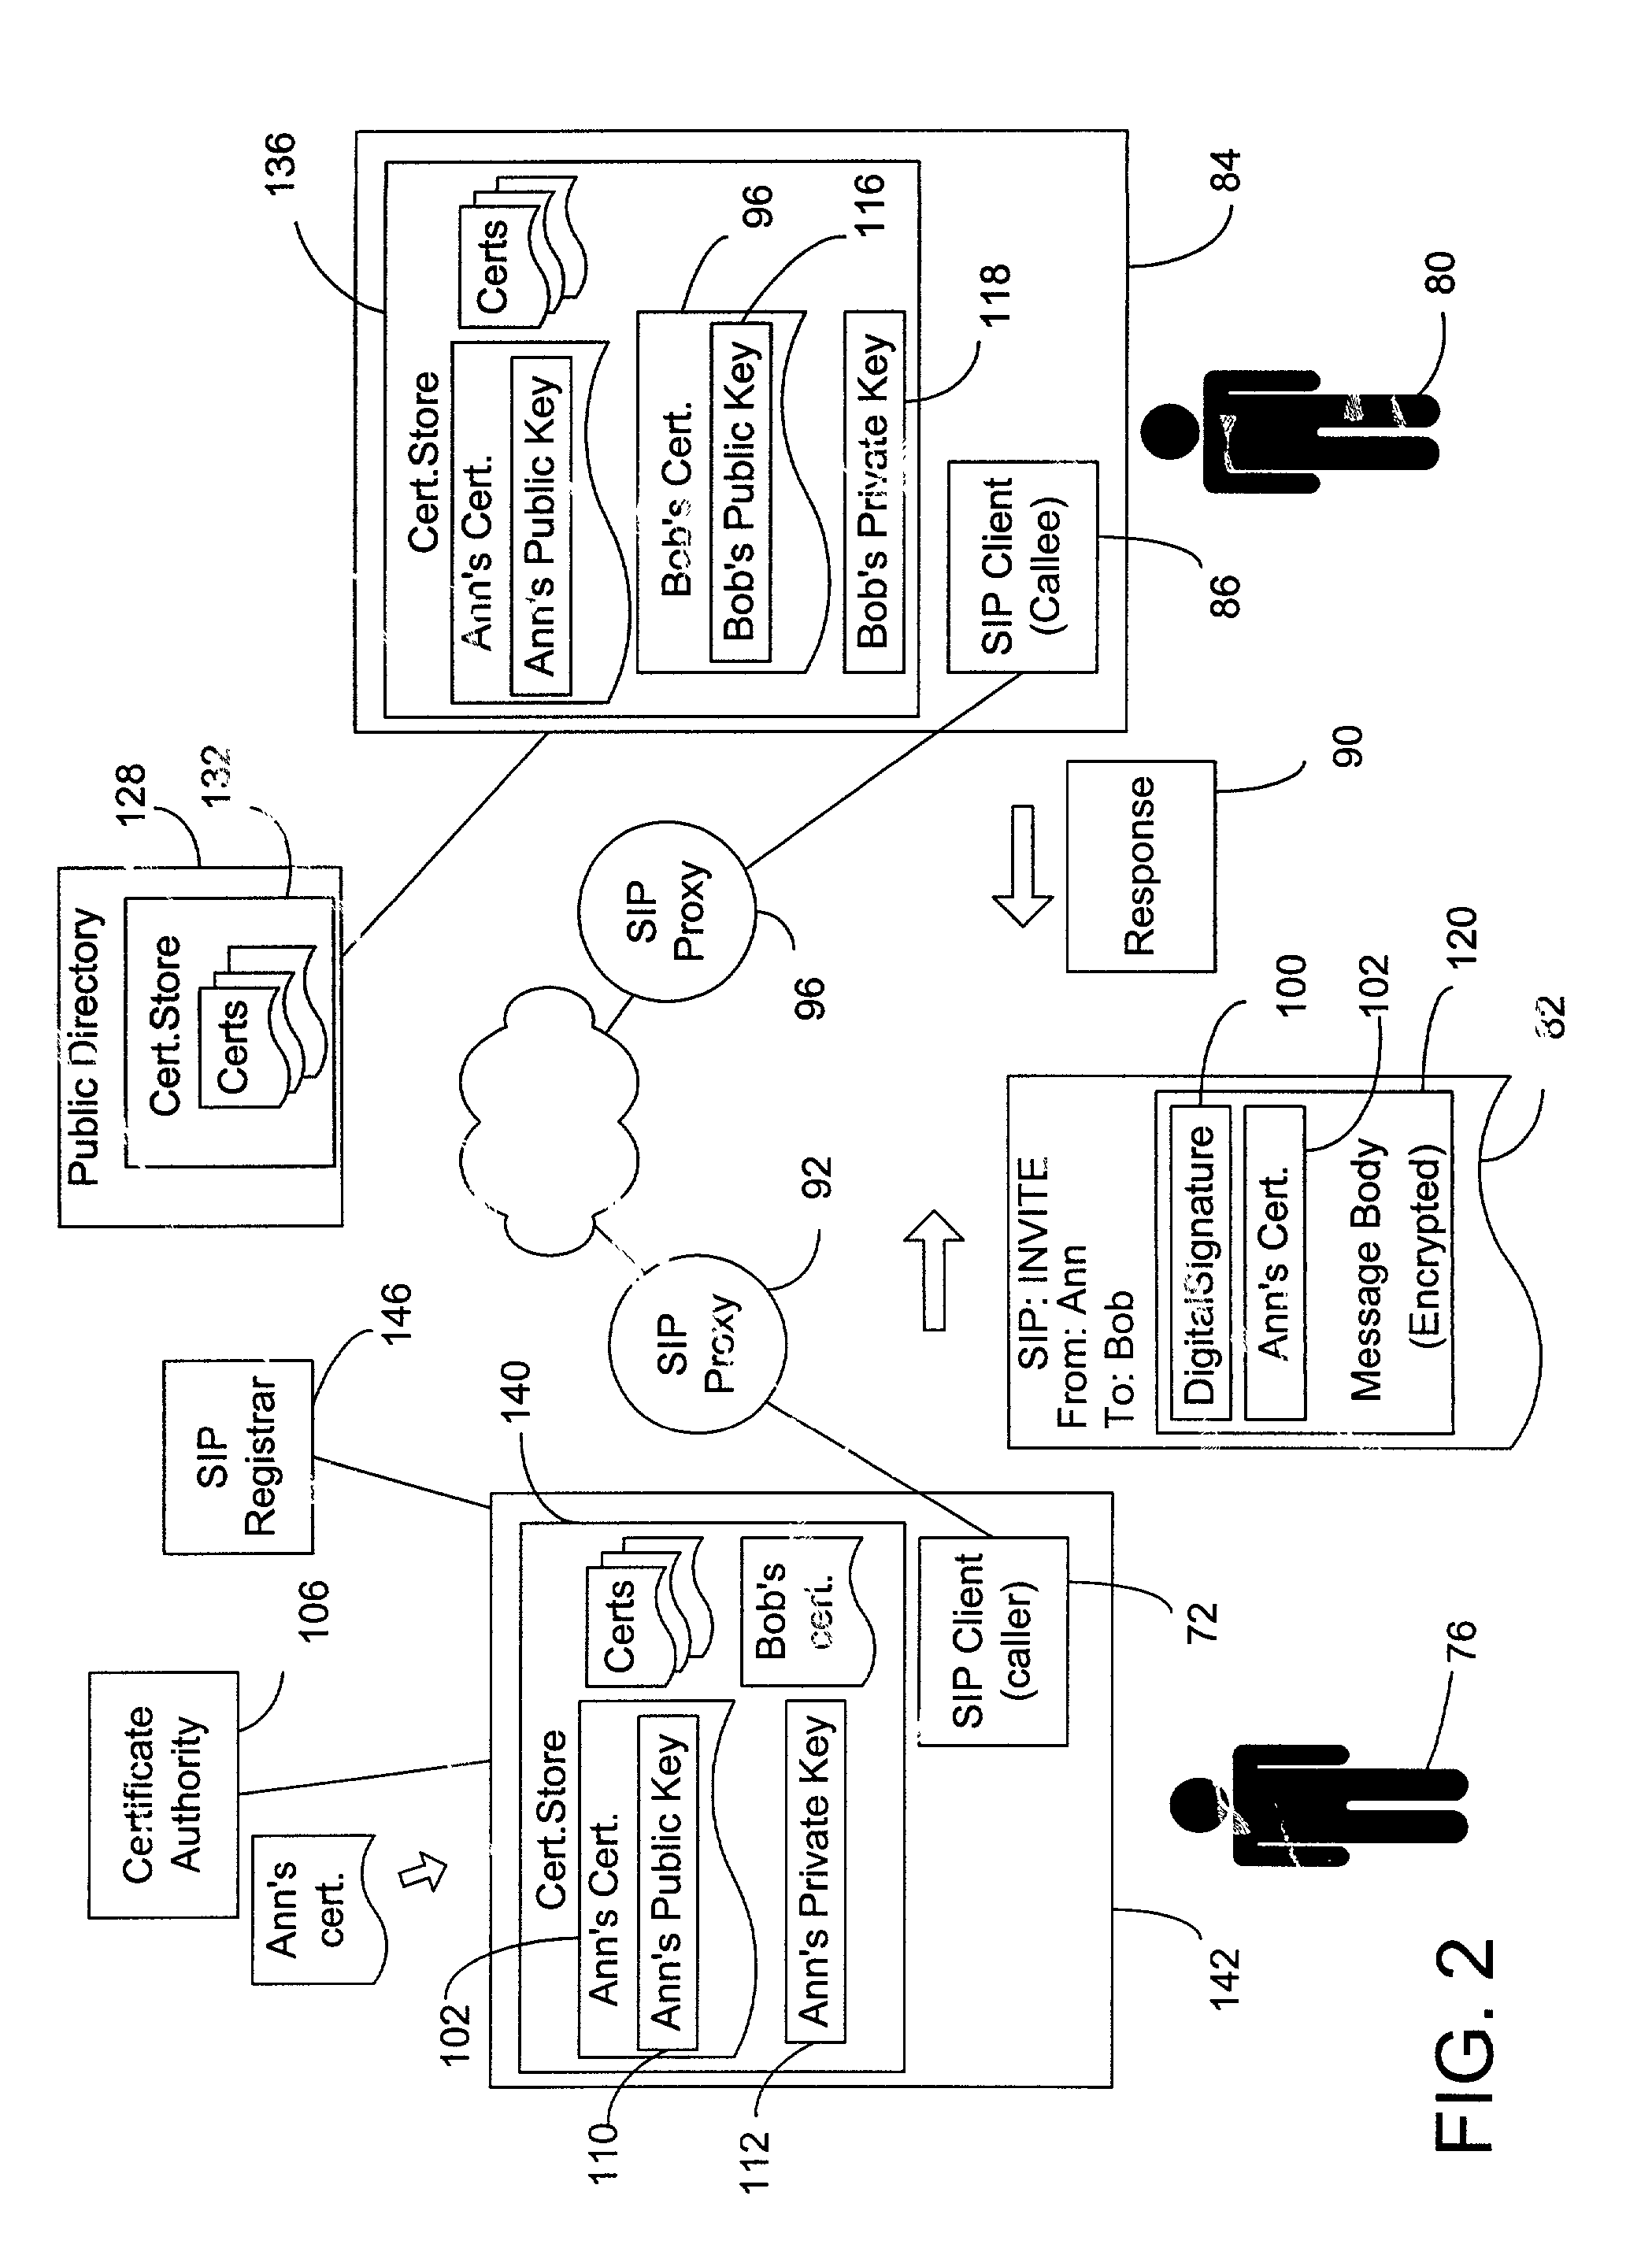 End-to-end authentication of session initiation protocol messages using certificates